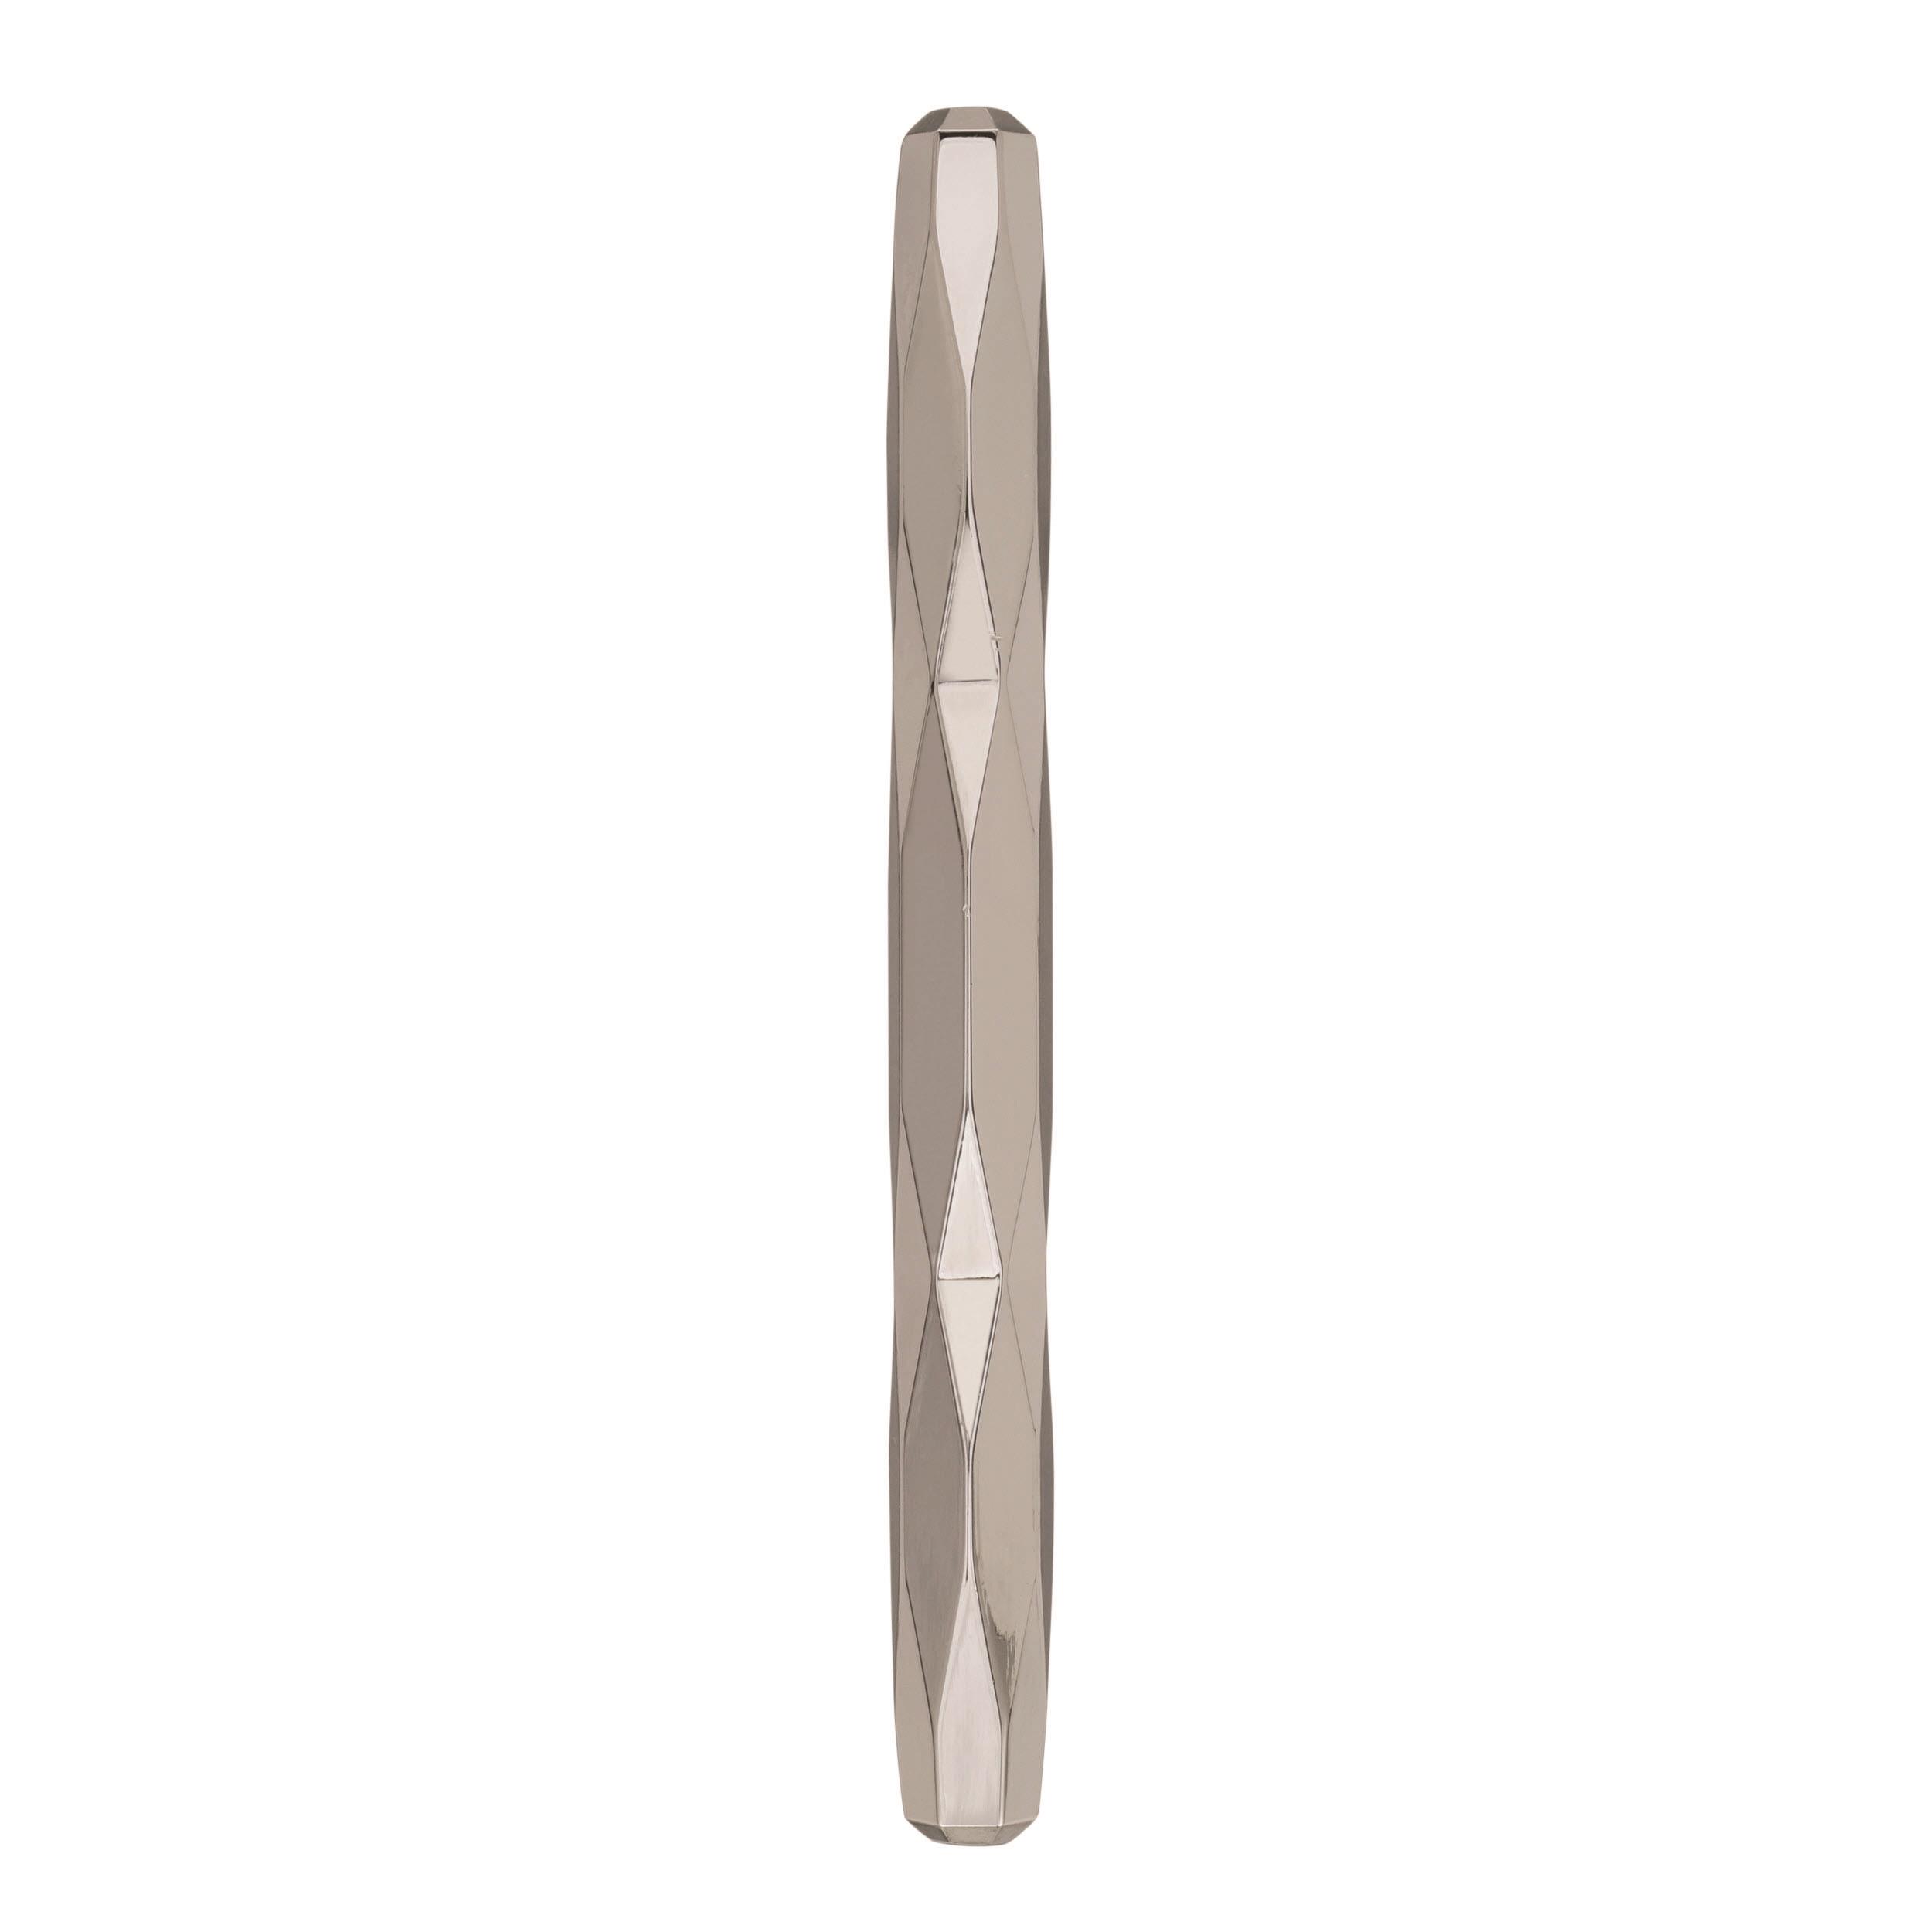 St. Vincent Pull, 3-3/4 in (96 mm), Polished Nickel